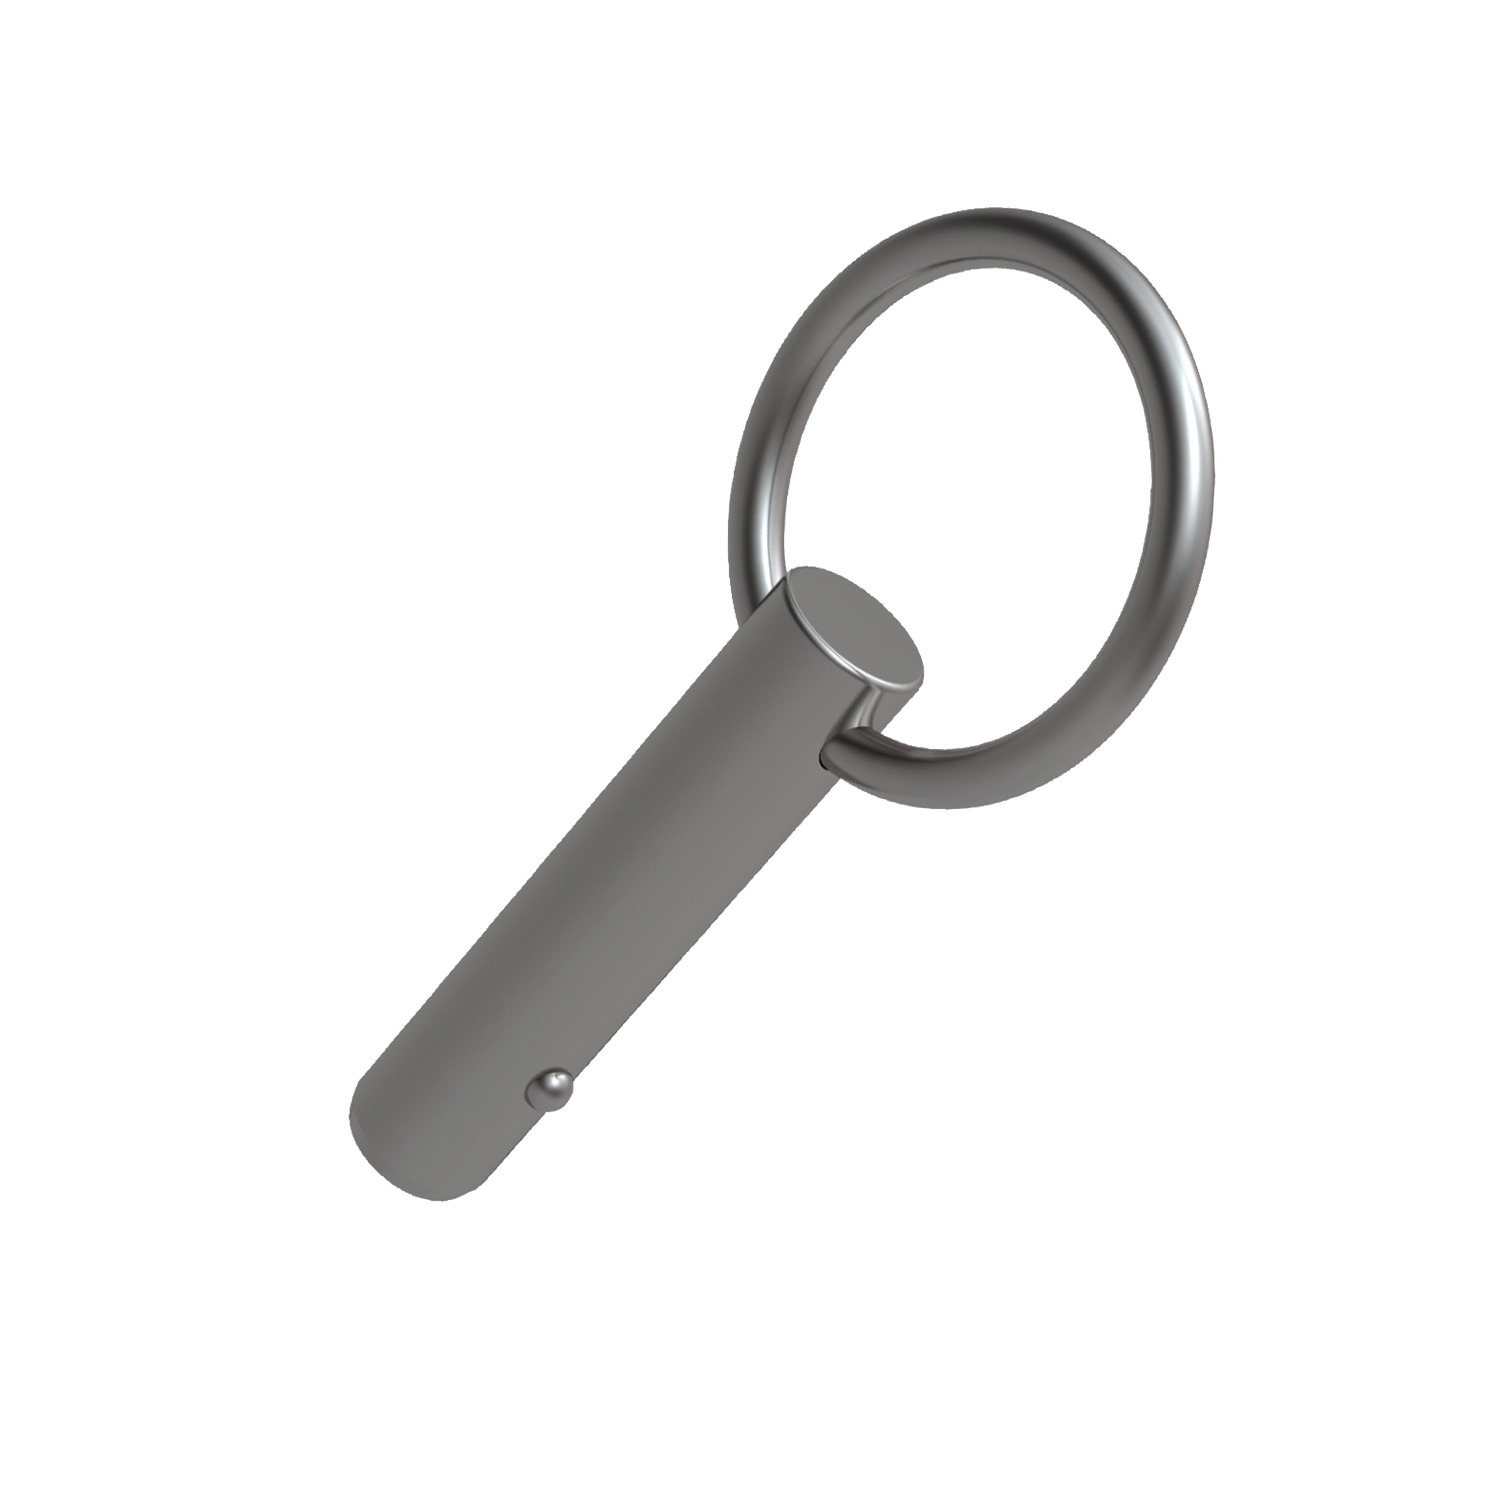 Detent Pin Carbon steel and stainless steel detent pins. Solid body with direct spring loaded ball ensures reliable operation, suitable for commercial and military applications.